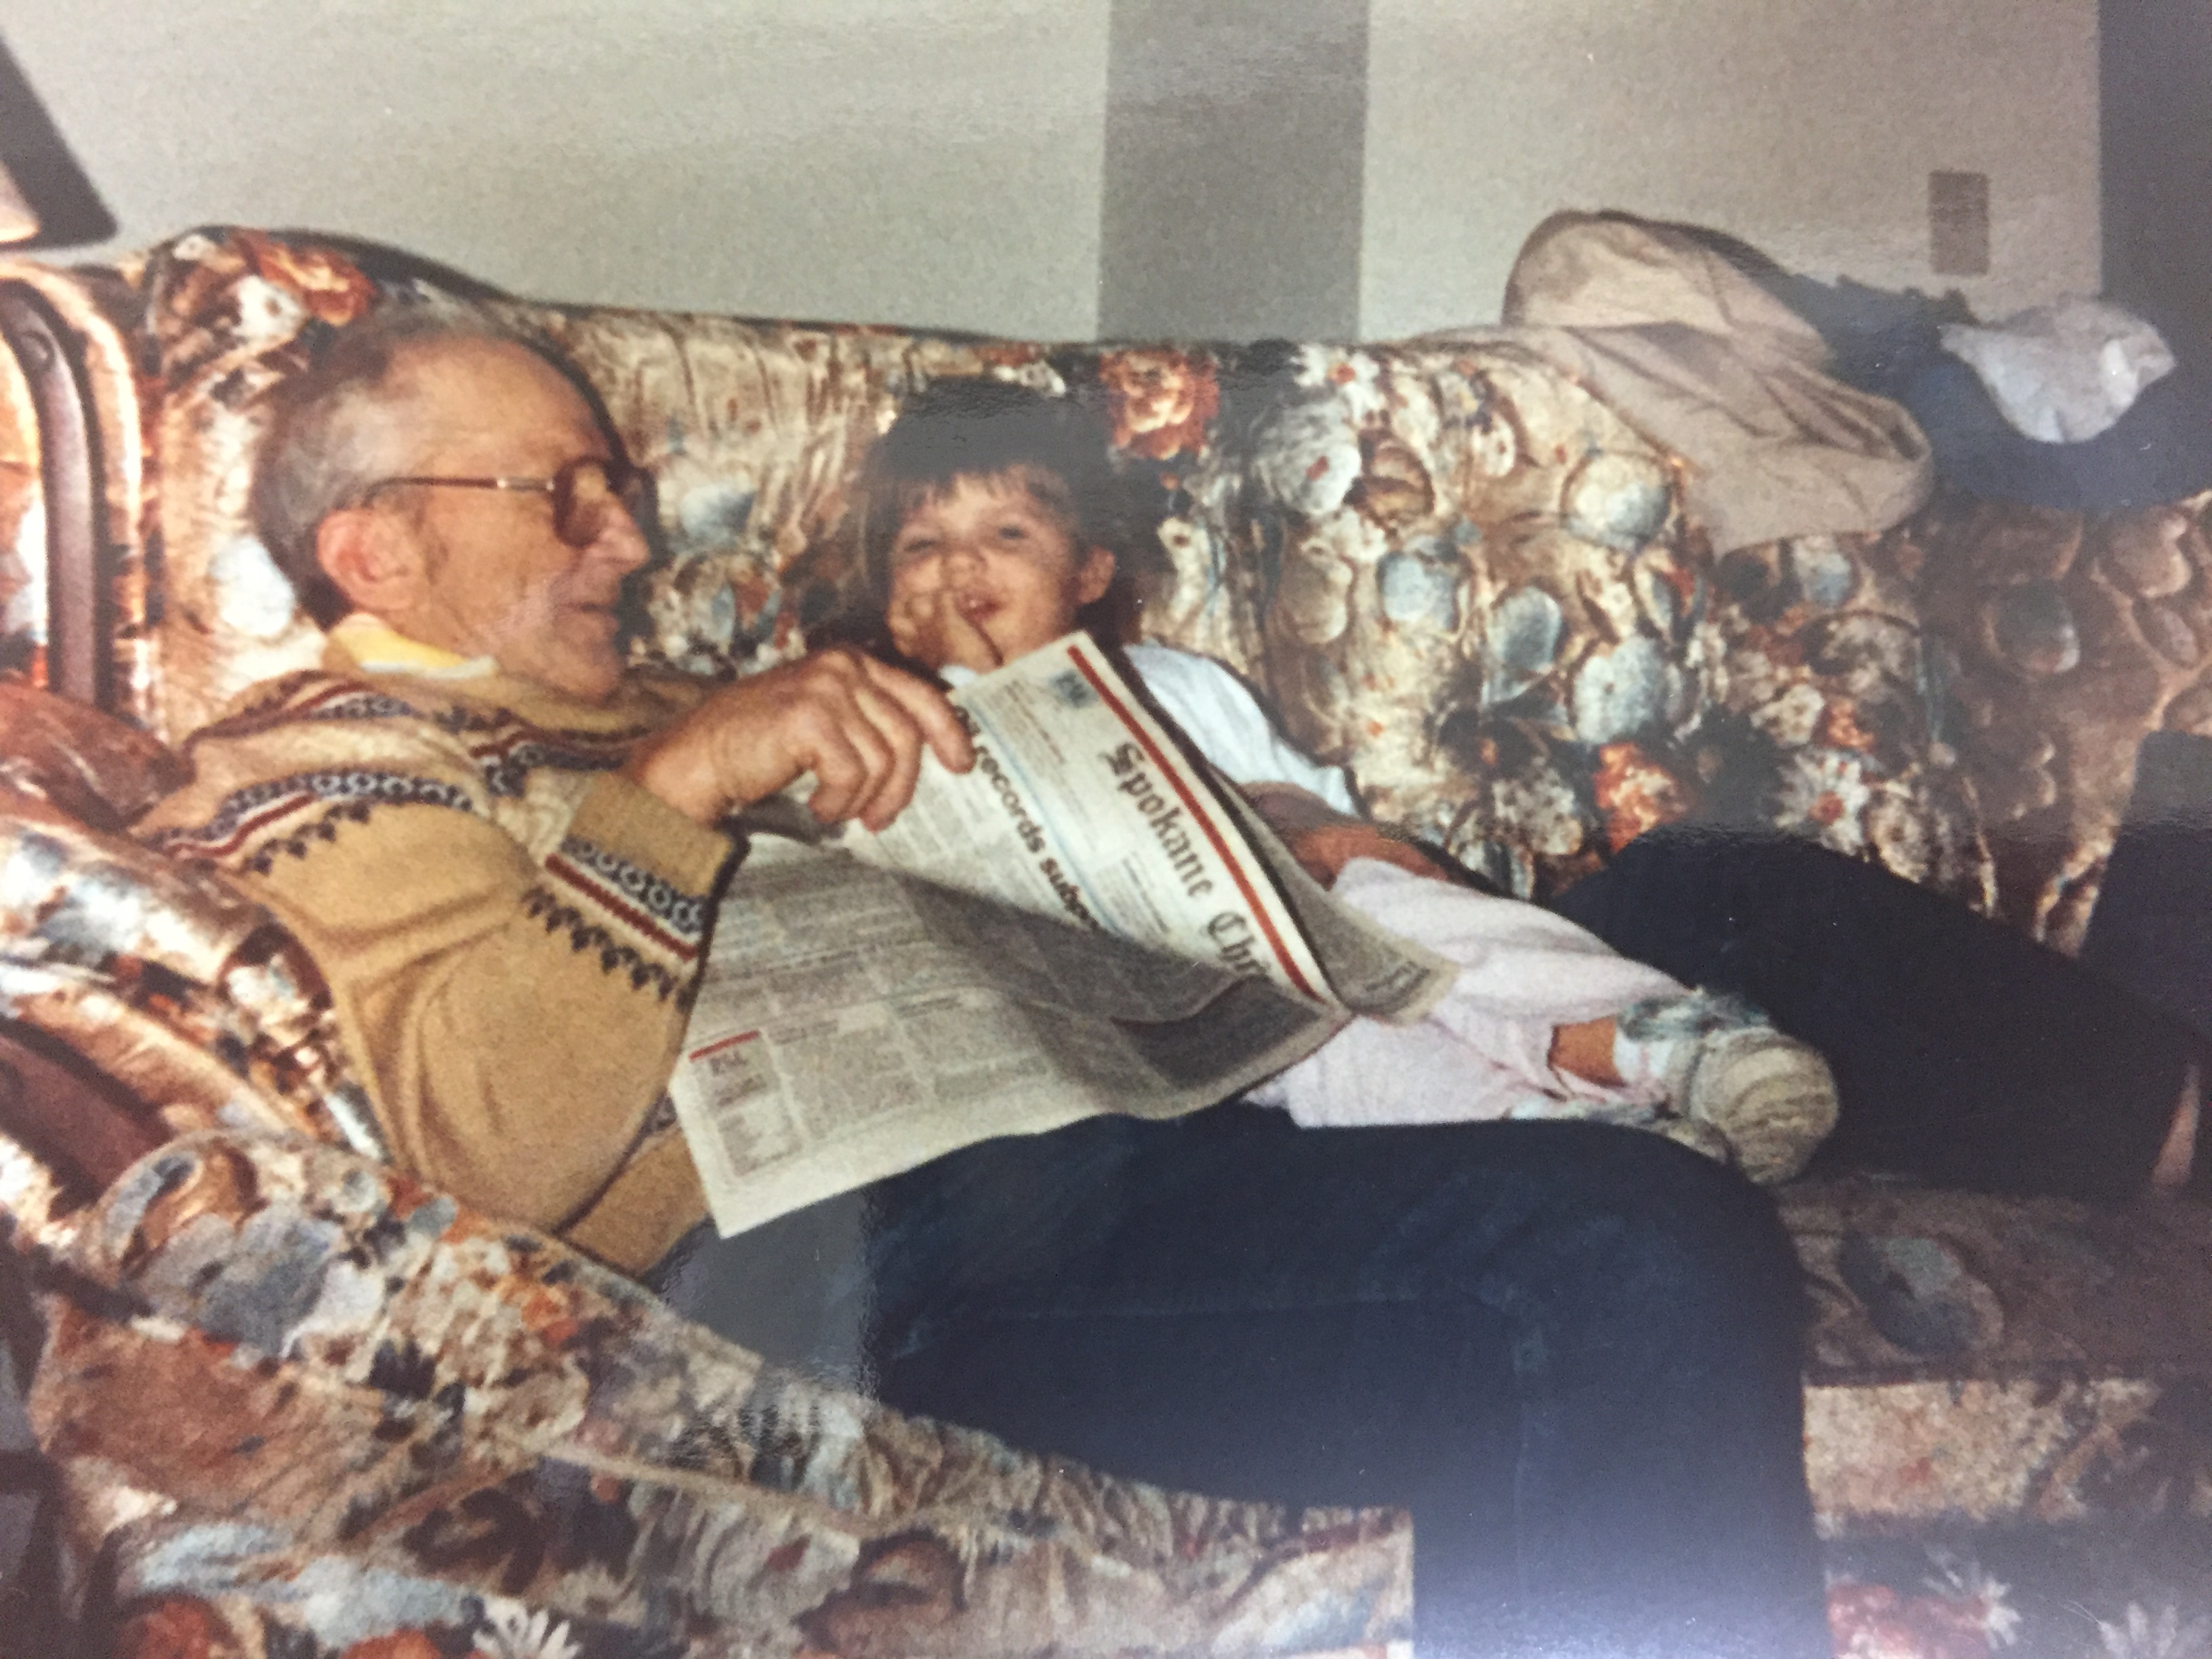 Stanley Zobel with his great-granddaughter (my daughter) Jessica in 1990. Photo by Cathy Hanson